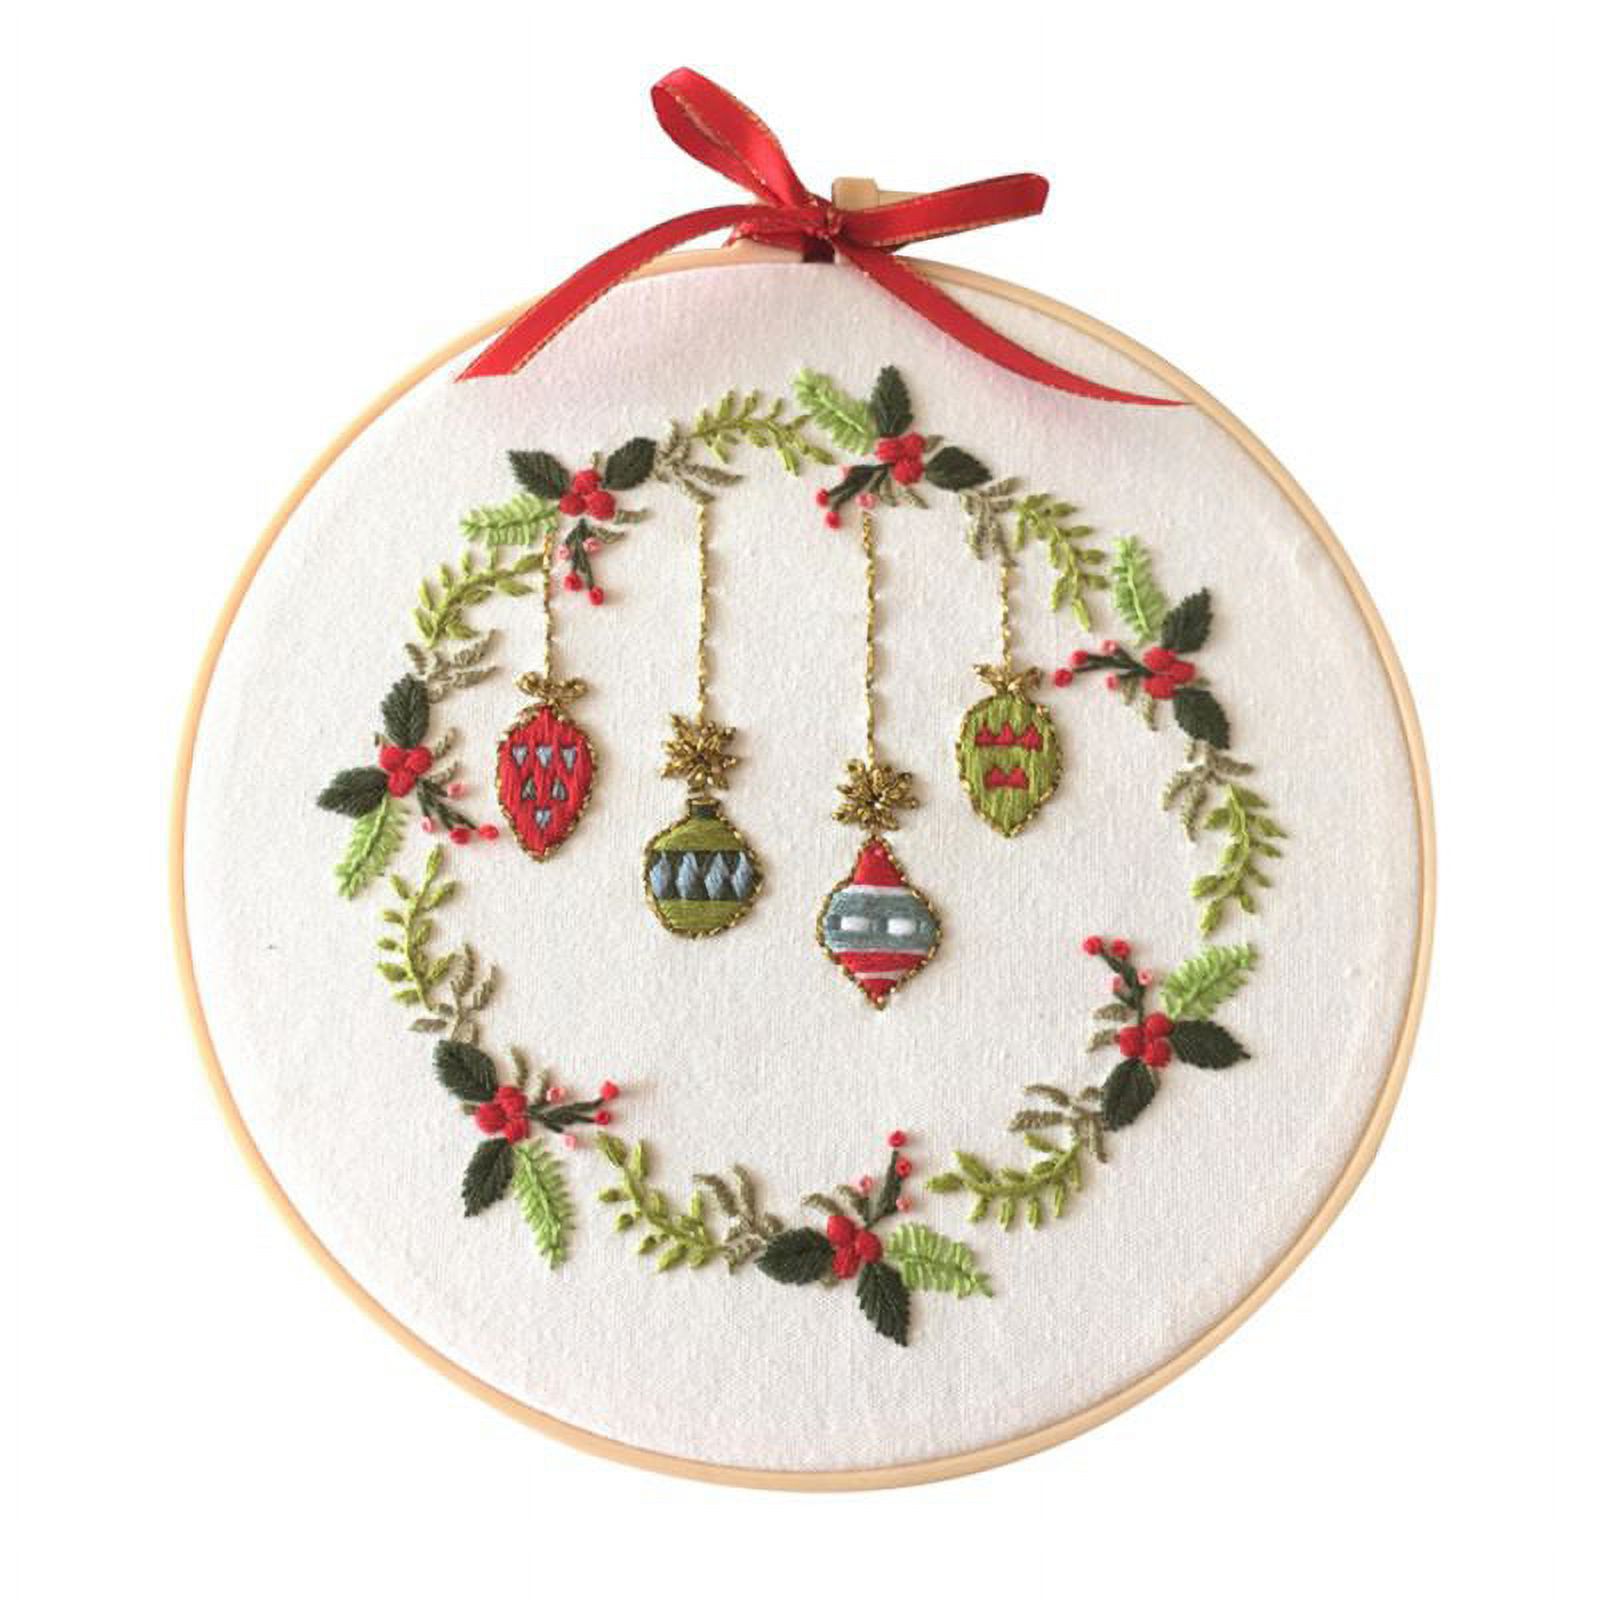 Embroidery Starters Kits with Pattern, Stamped Cross Stitch Kits